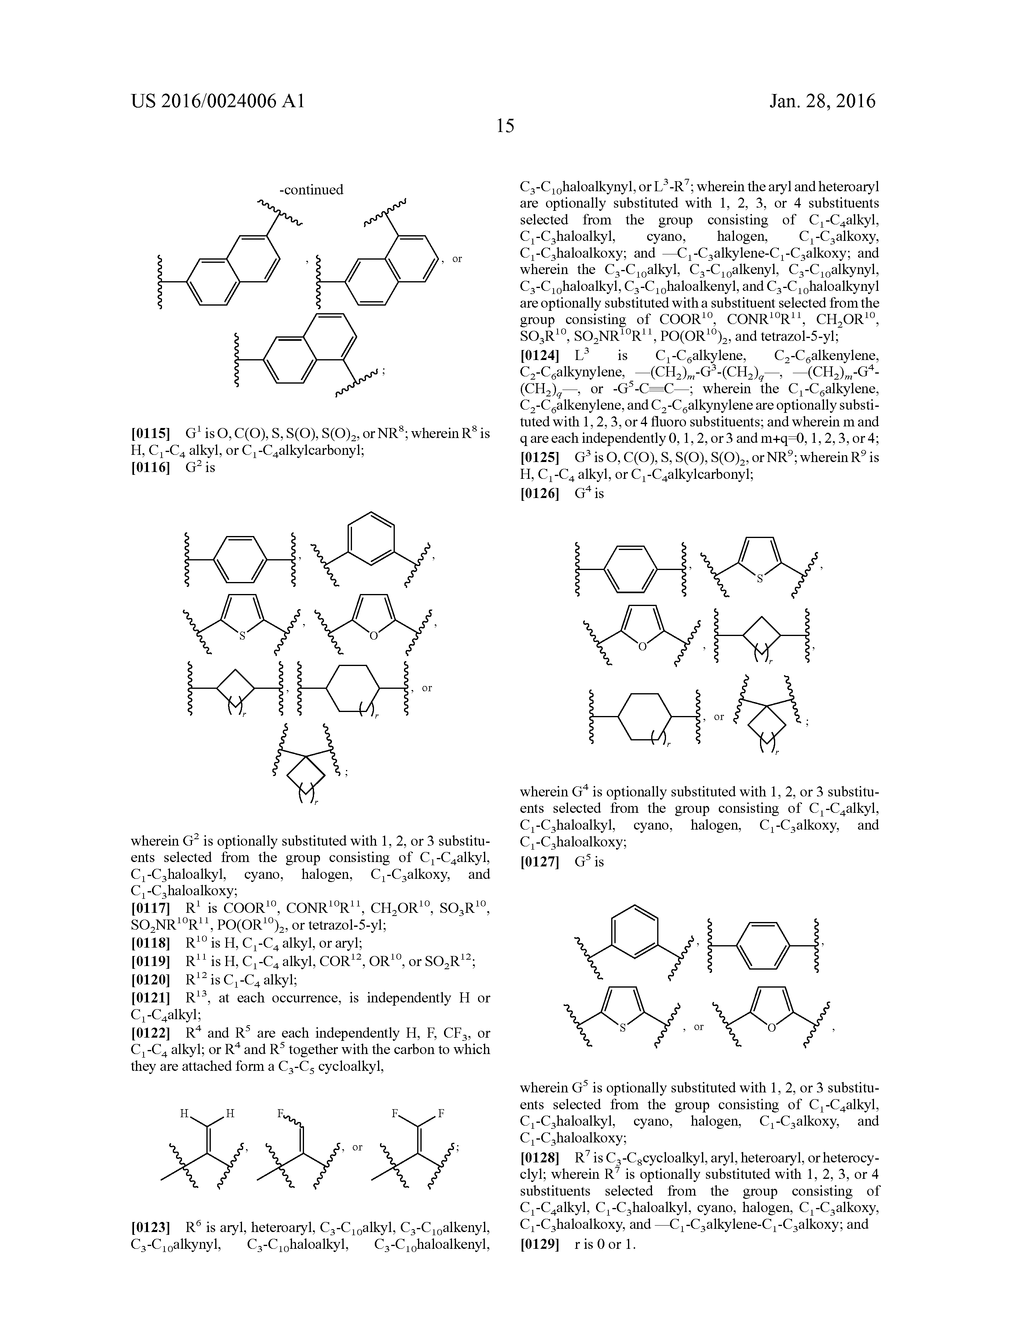 DIFLUOROLACTAM COMPOUNDS AS EP4 RECEPTOR-SELECTIVE AGONISTS FOR USE IN THE     TREATMENT OF EP4-MEDIATED DISEASES AND CONDITIONS - diagram, schematic, and image 17